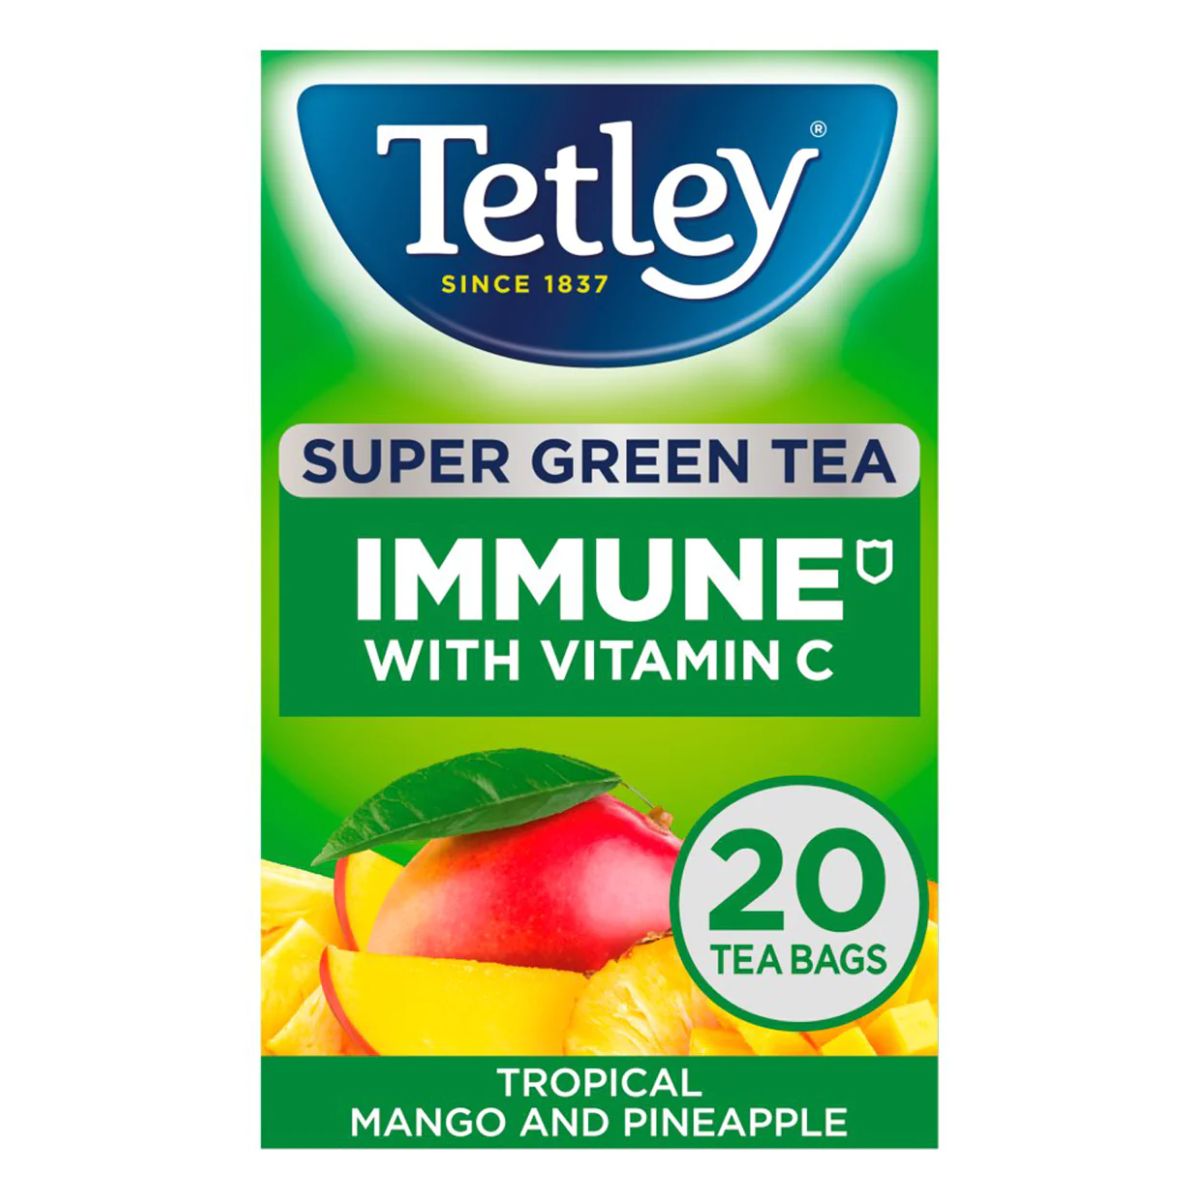 A box of Tetley - Super Green Tea with Vitamin C - 20 Teabags, featuring tropical mango and pineapple flavors.